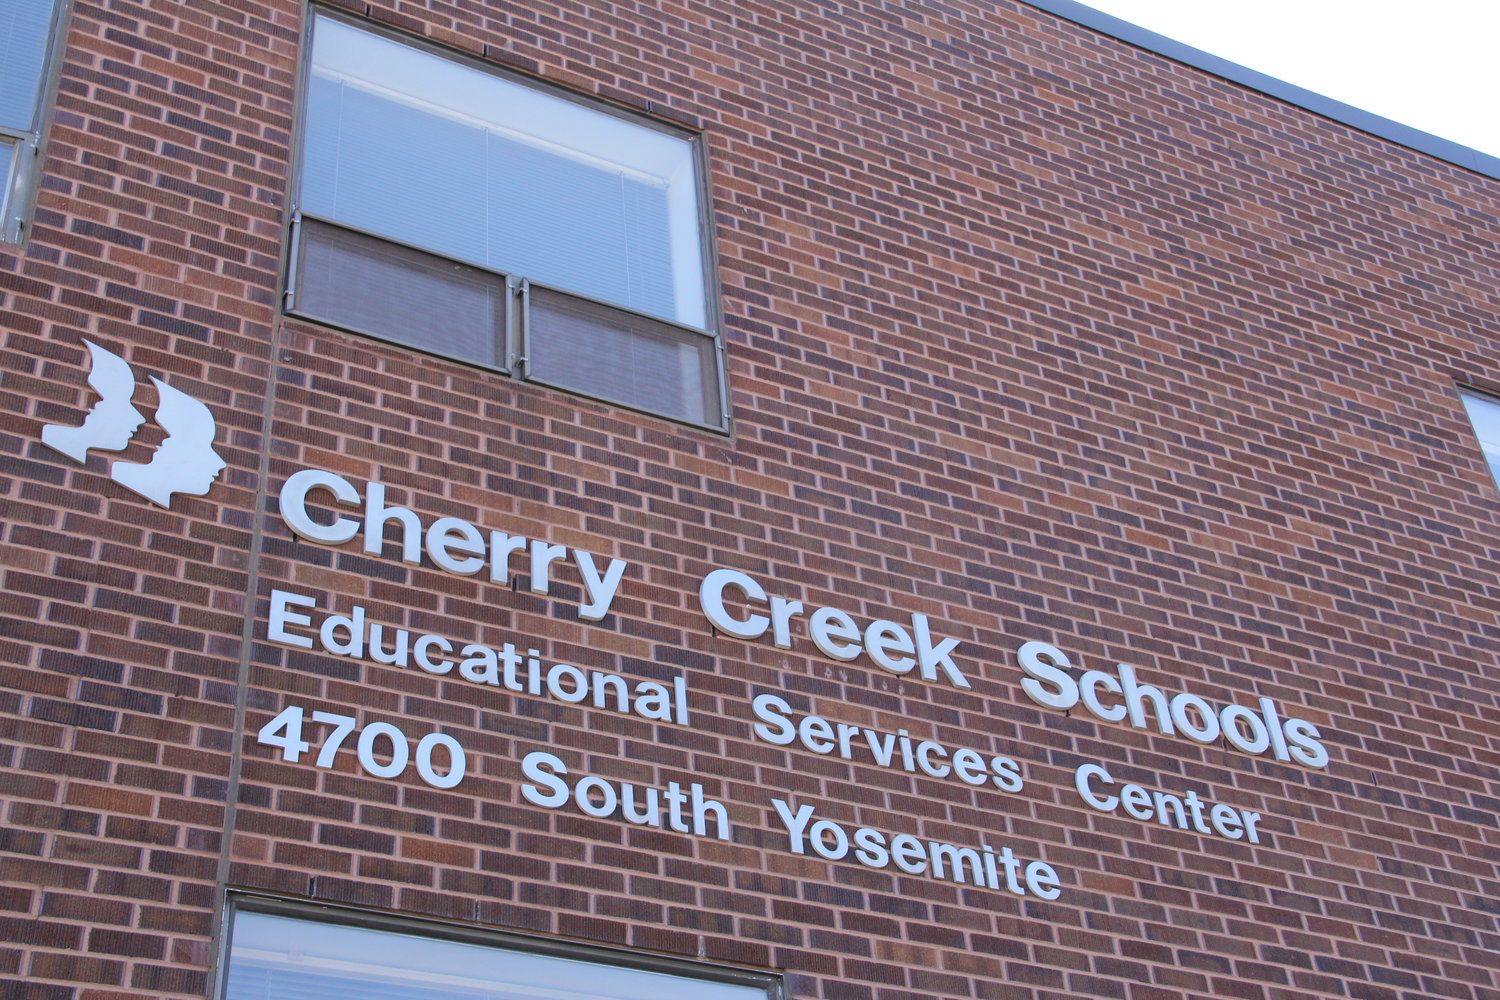 Cherry Creek School District students back for in-person classes